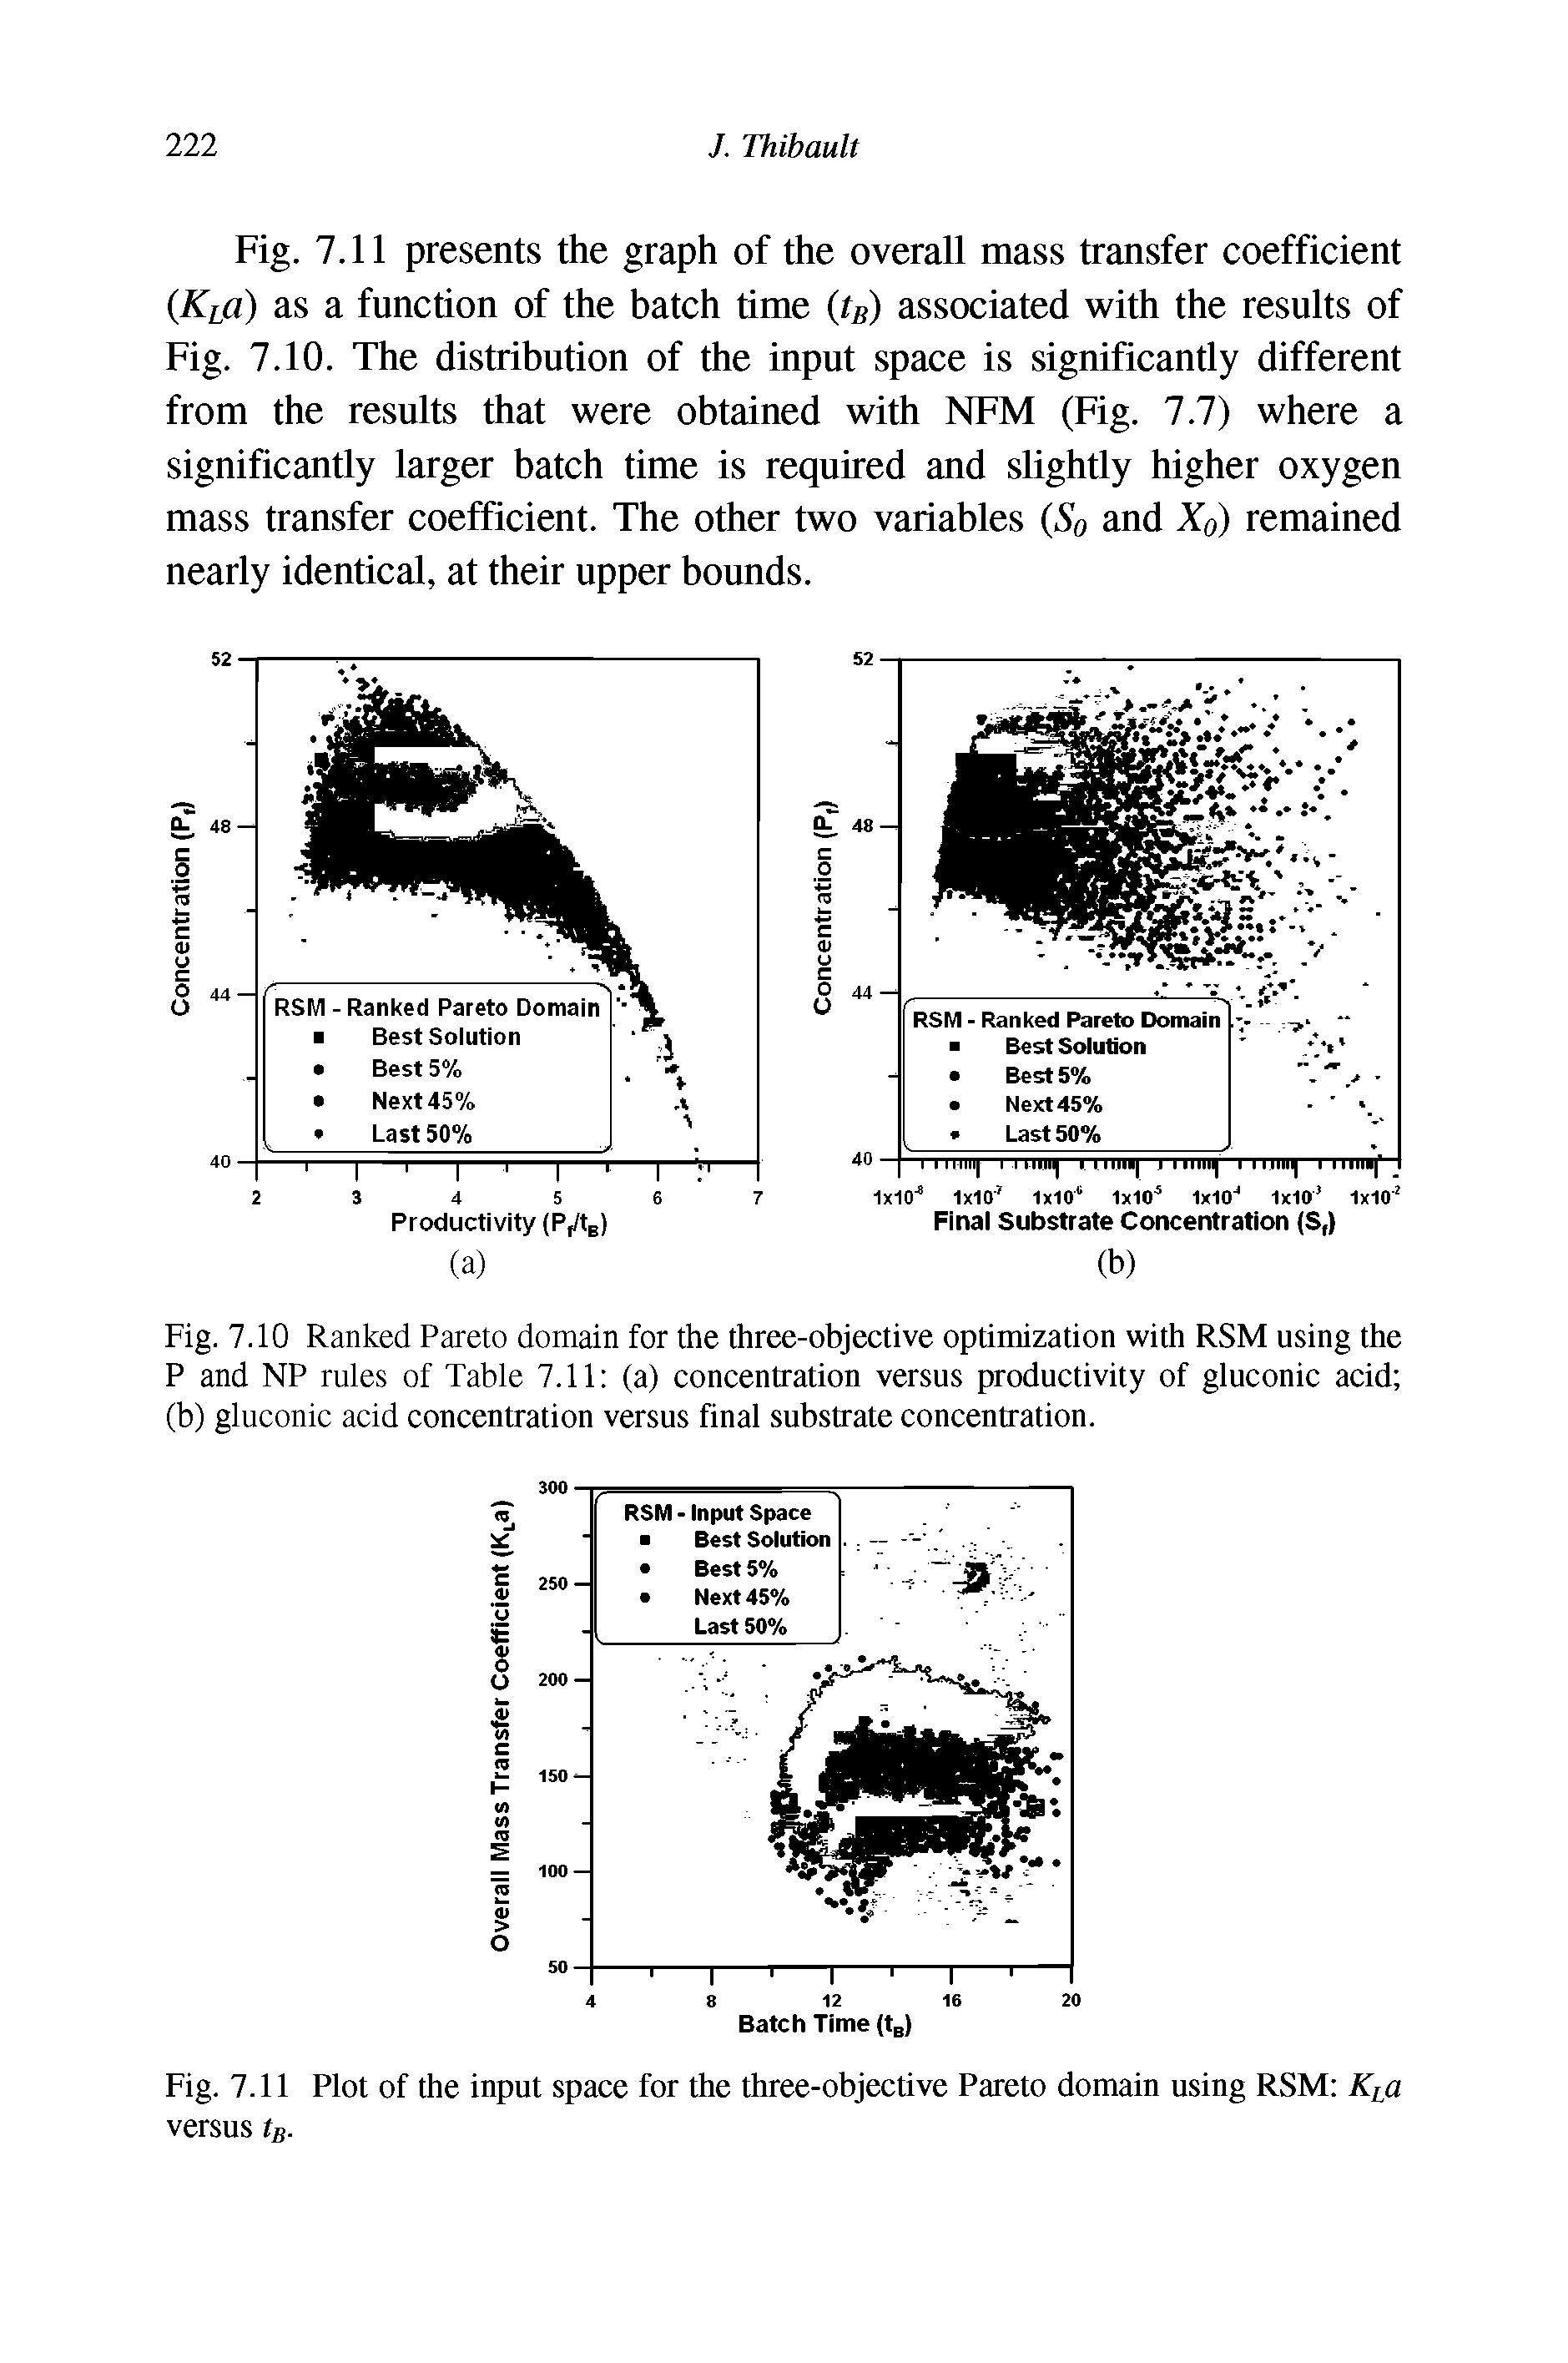 Fig. 7.10 Ranked Pareto domain for the three-objective optimization with RSM using the P and NP rules of Table 7.11 (a) concentration versus productivity of gluconic acid (b) gluconic acid concentration versus final substrate concentration.